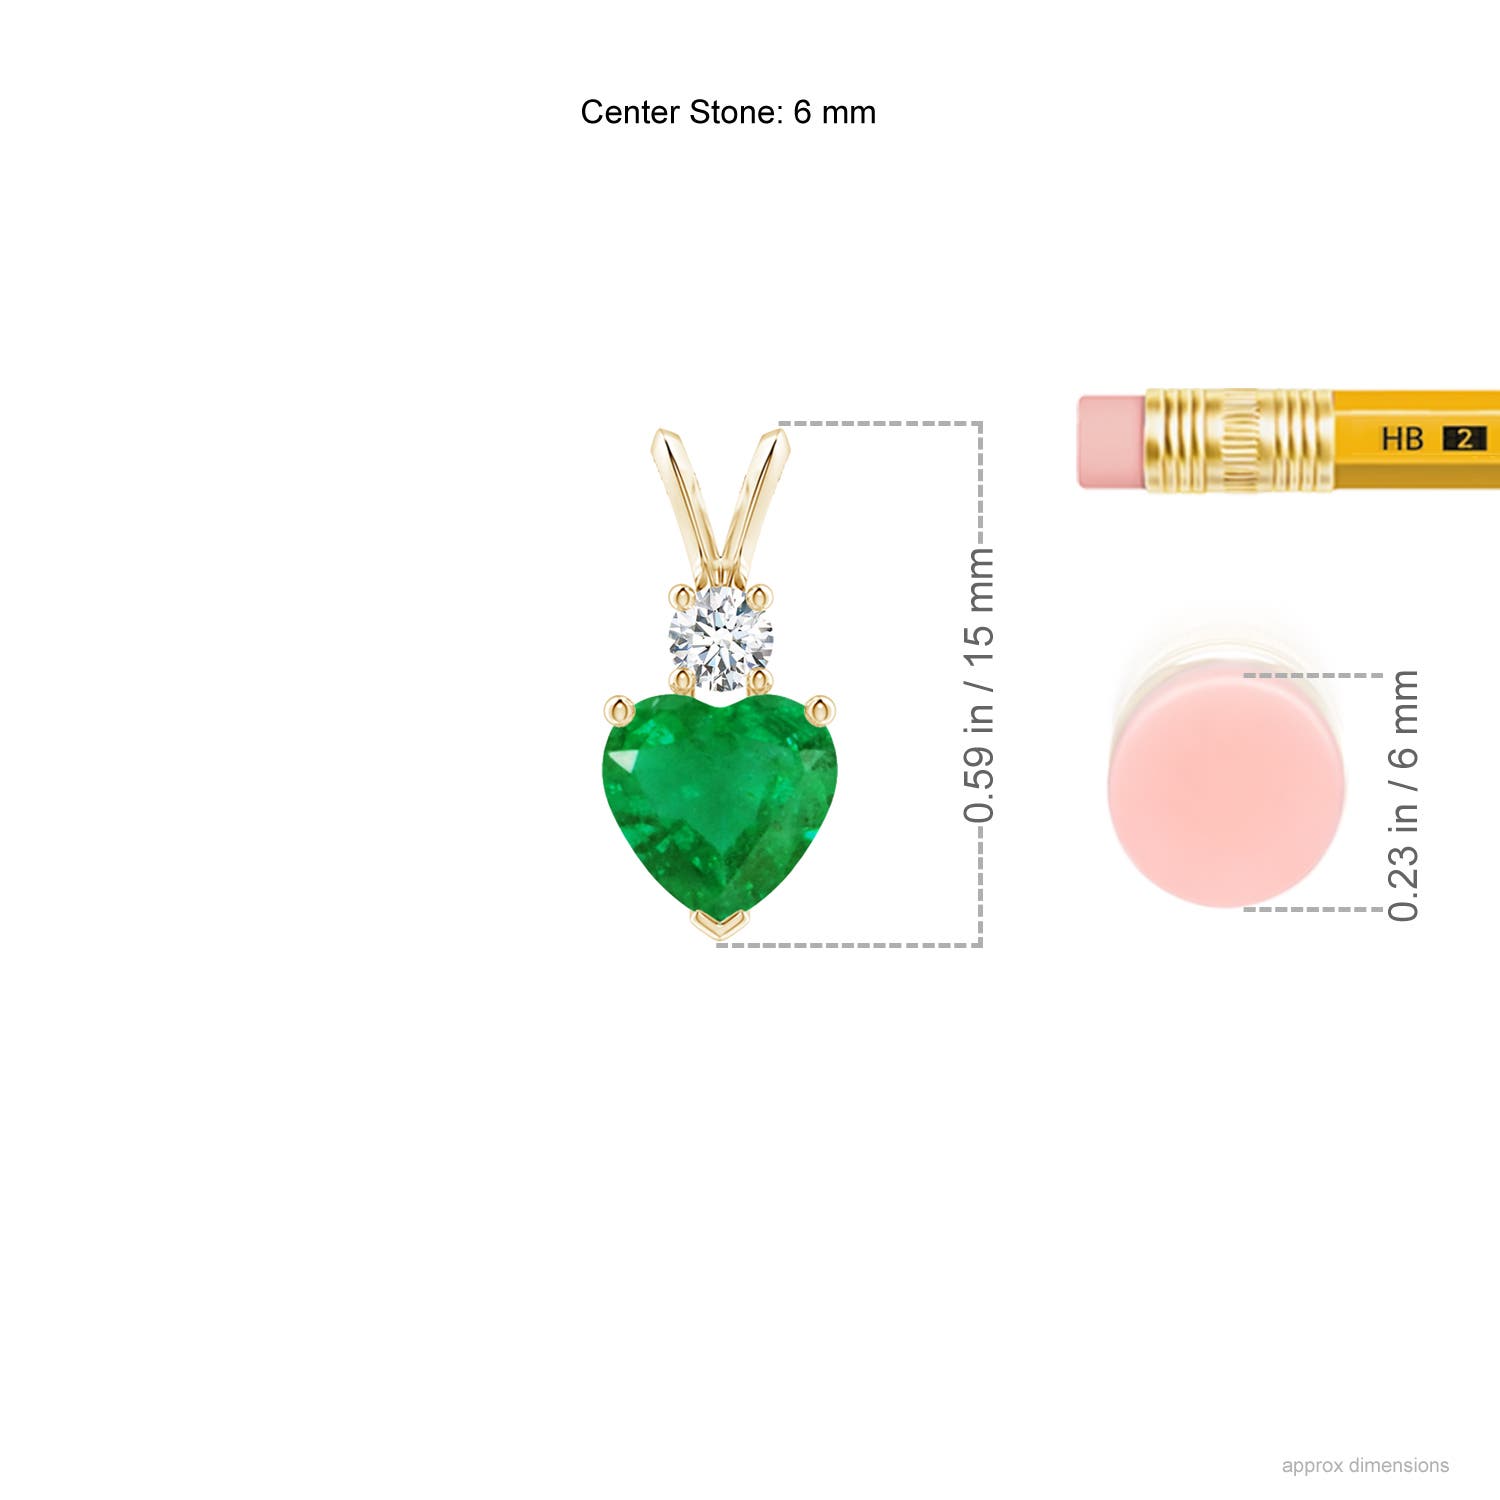 AA - Emerald / 0.68 CT / 14 KT Yellow Gold